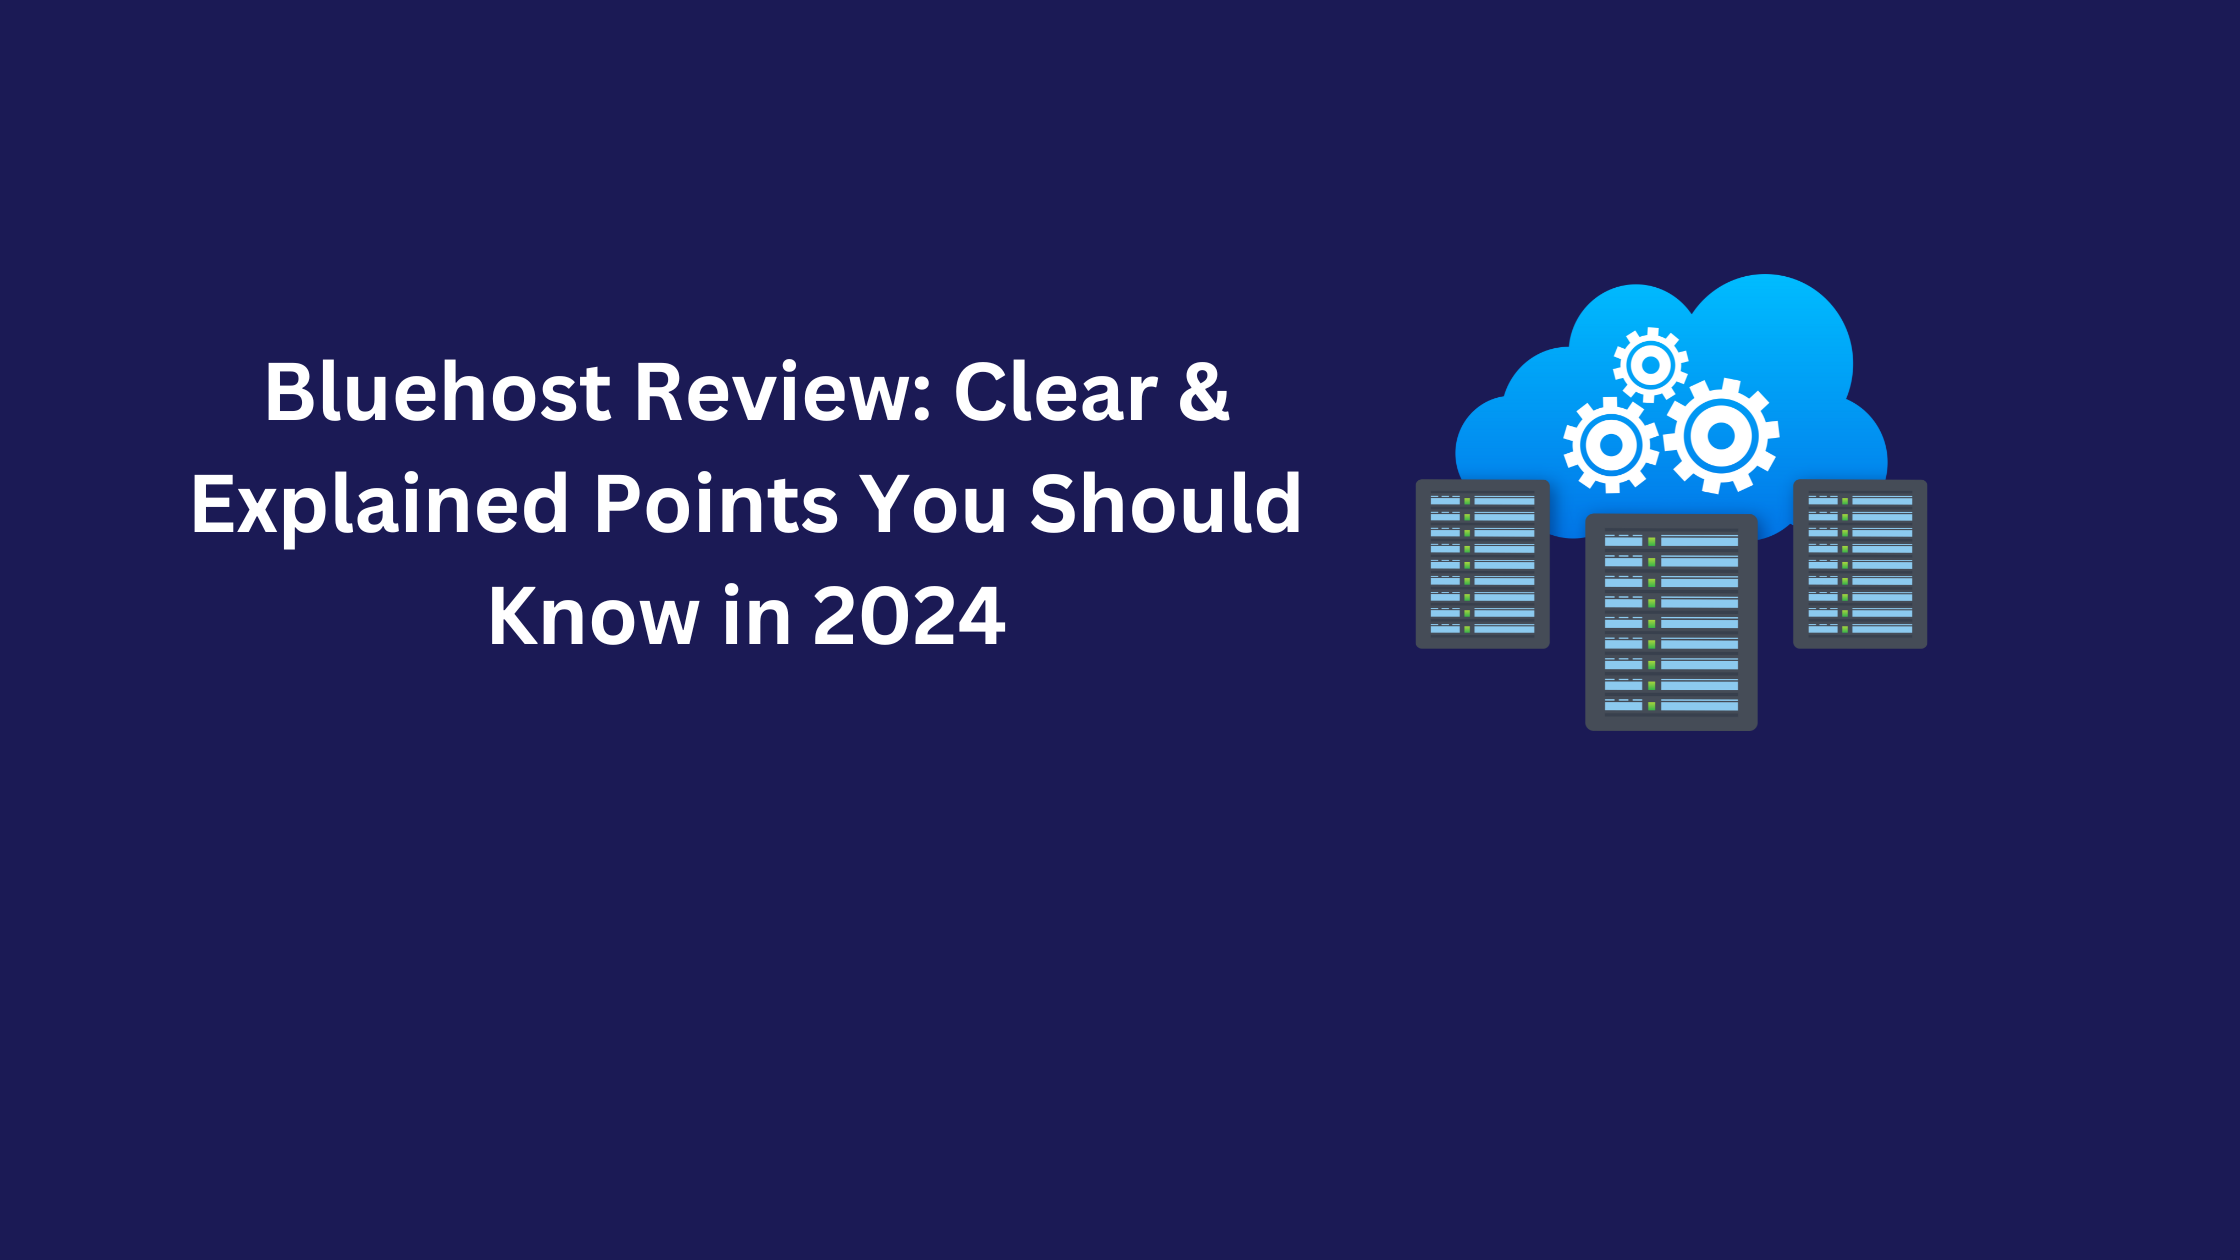 Bluehost Review: Clear & Explained Points You Should Know in 2024